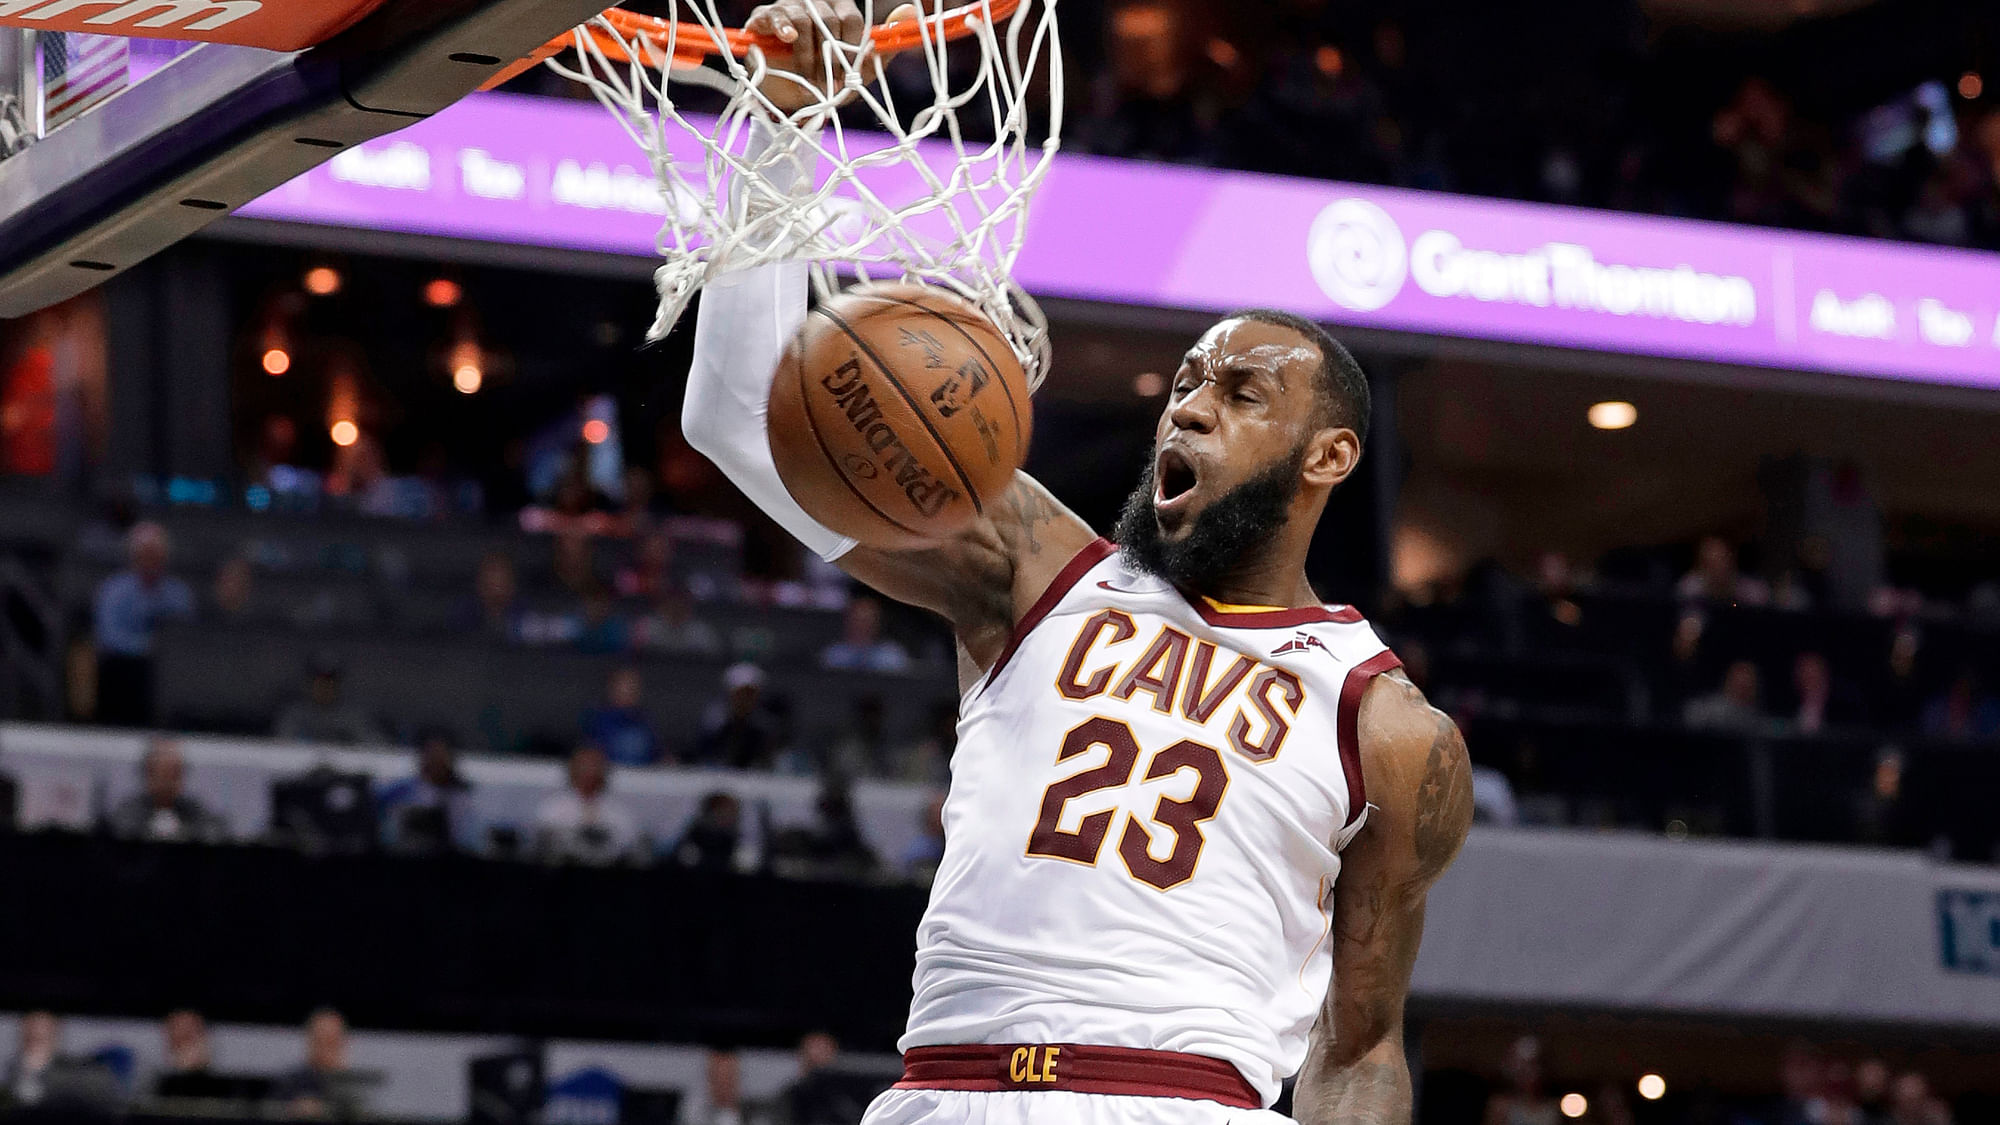 Cleveland Cavaliers’ LeBron James (23) dunks past Charlotte Hornets’ Dwight Howard (12) during the second half of an NBA game in Charlotte, N.C